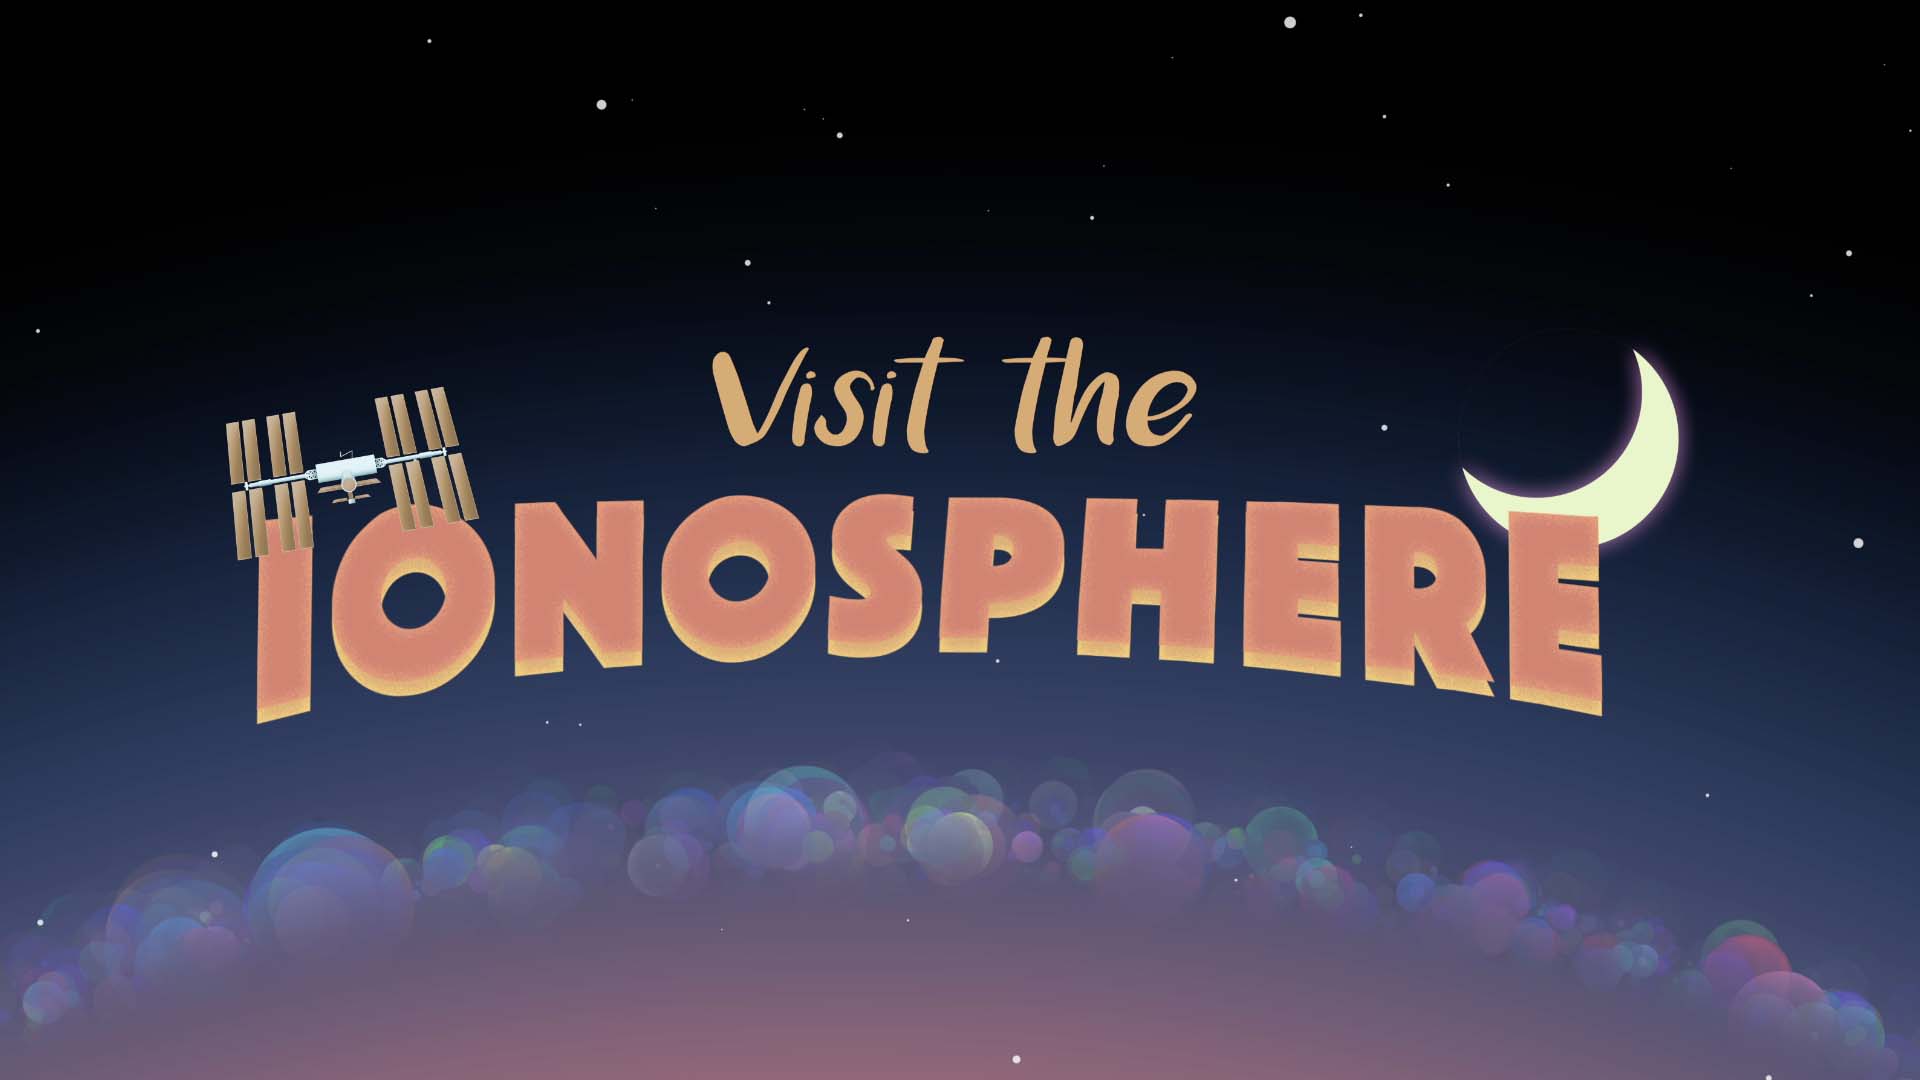 Preview Image for Welcome to the Ionosphere